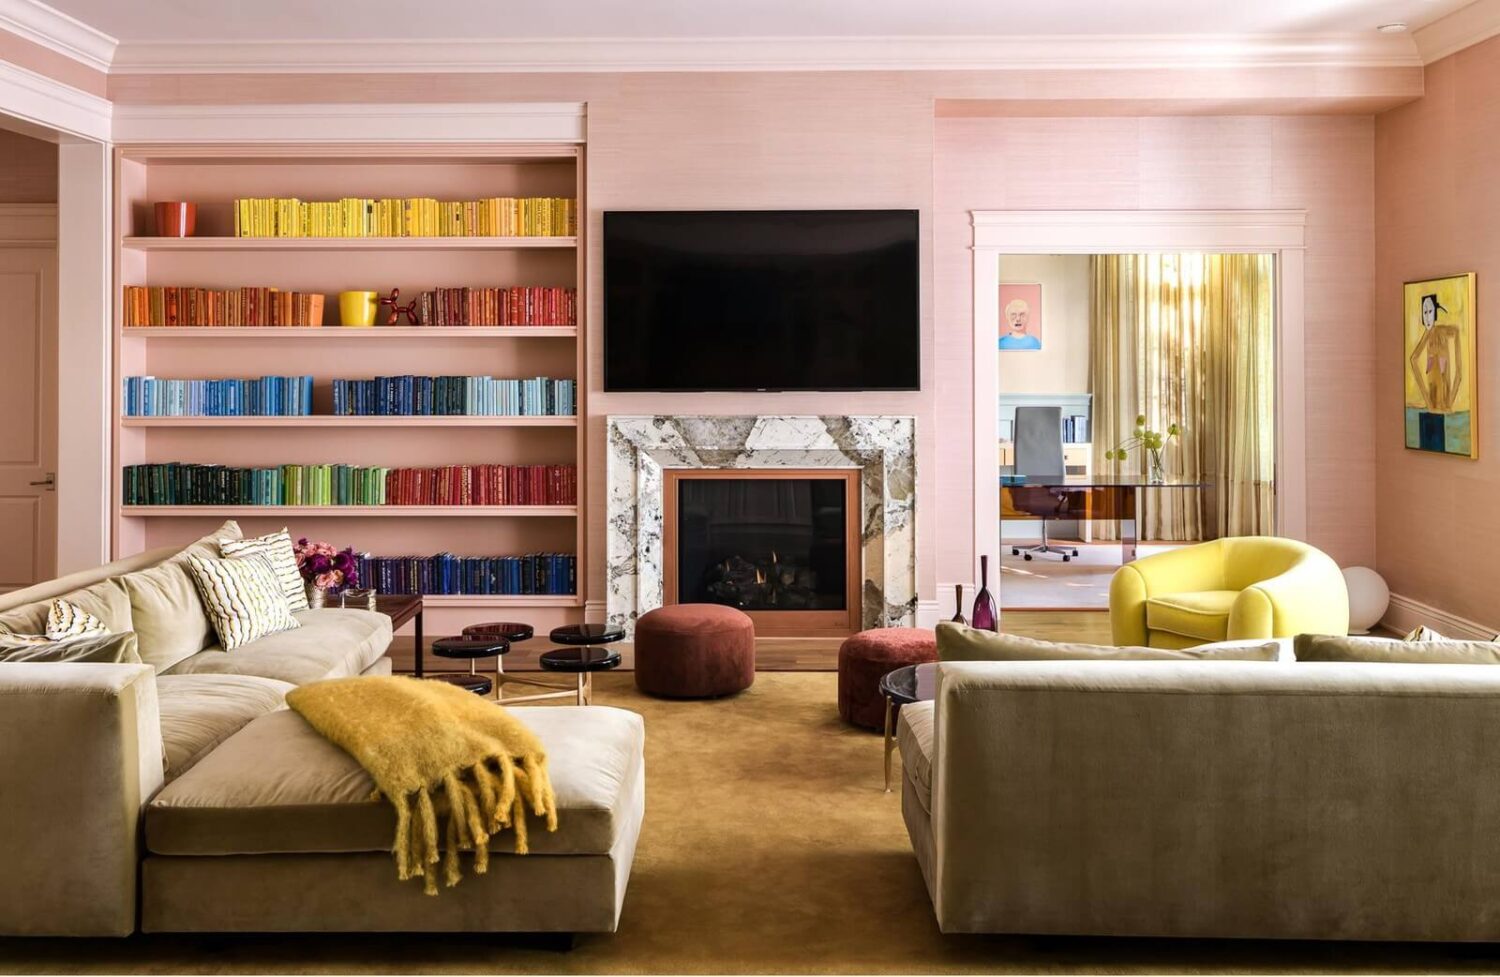 pink-television-room-color-coded-bookshelves-nordroom